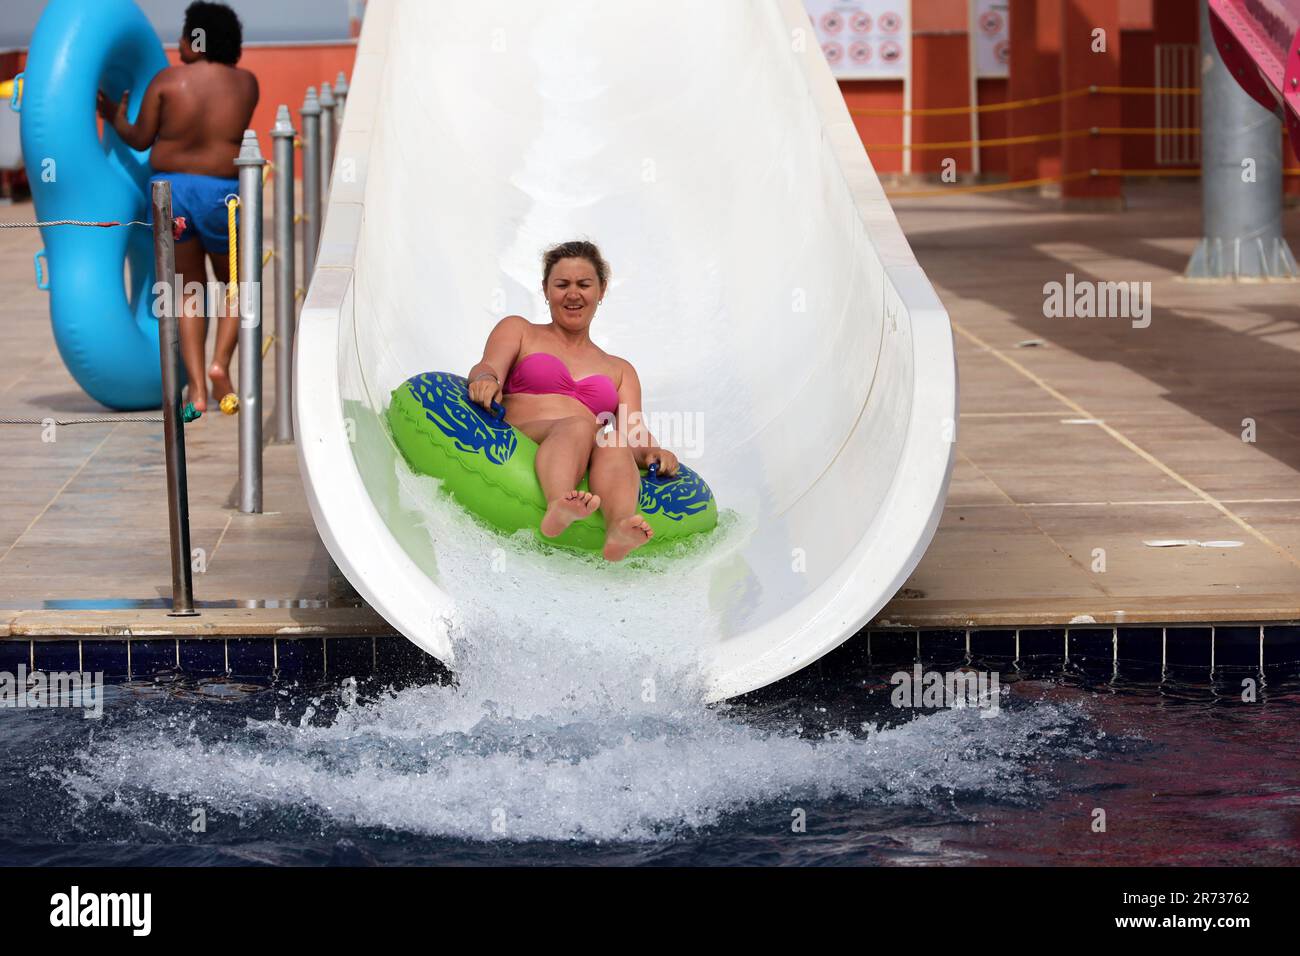 Happy woman in inflatable circle rides down on water slide at aqua park. Riding on water tube, enjoying summer holiday, beach resort Stock Photo